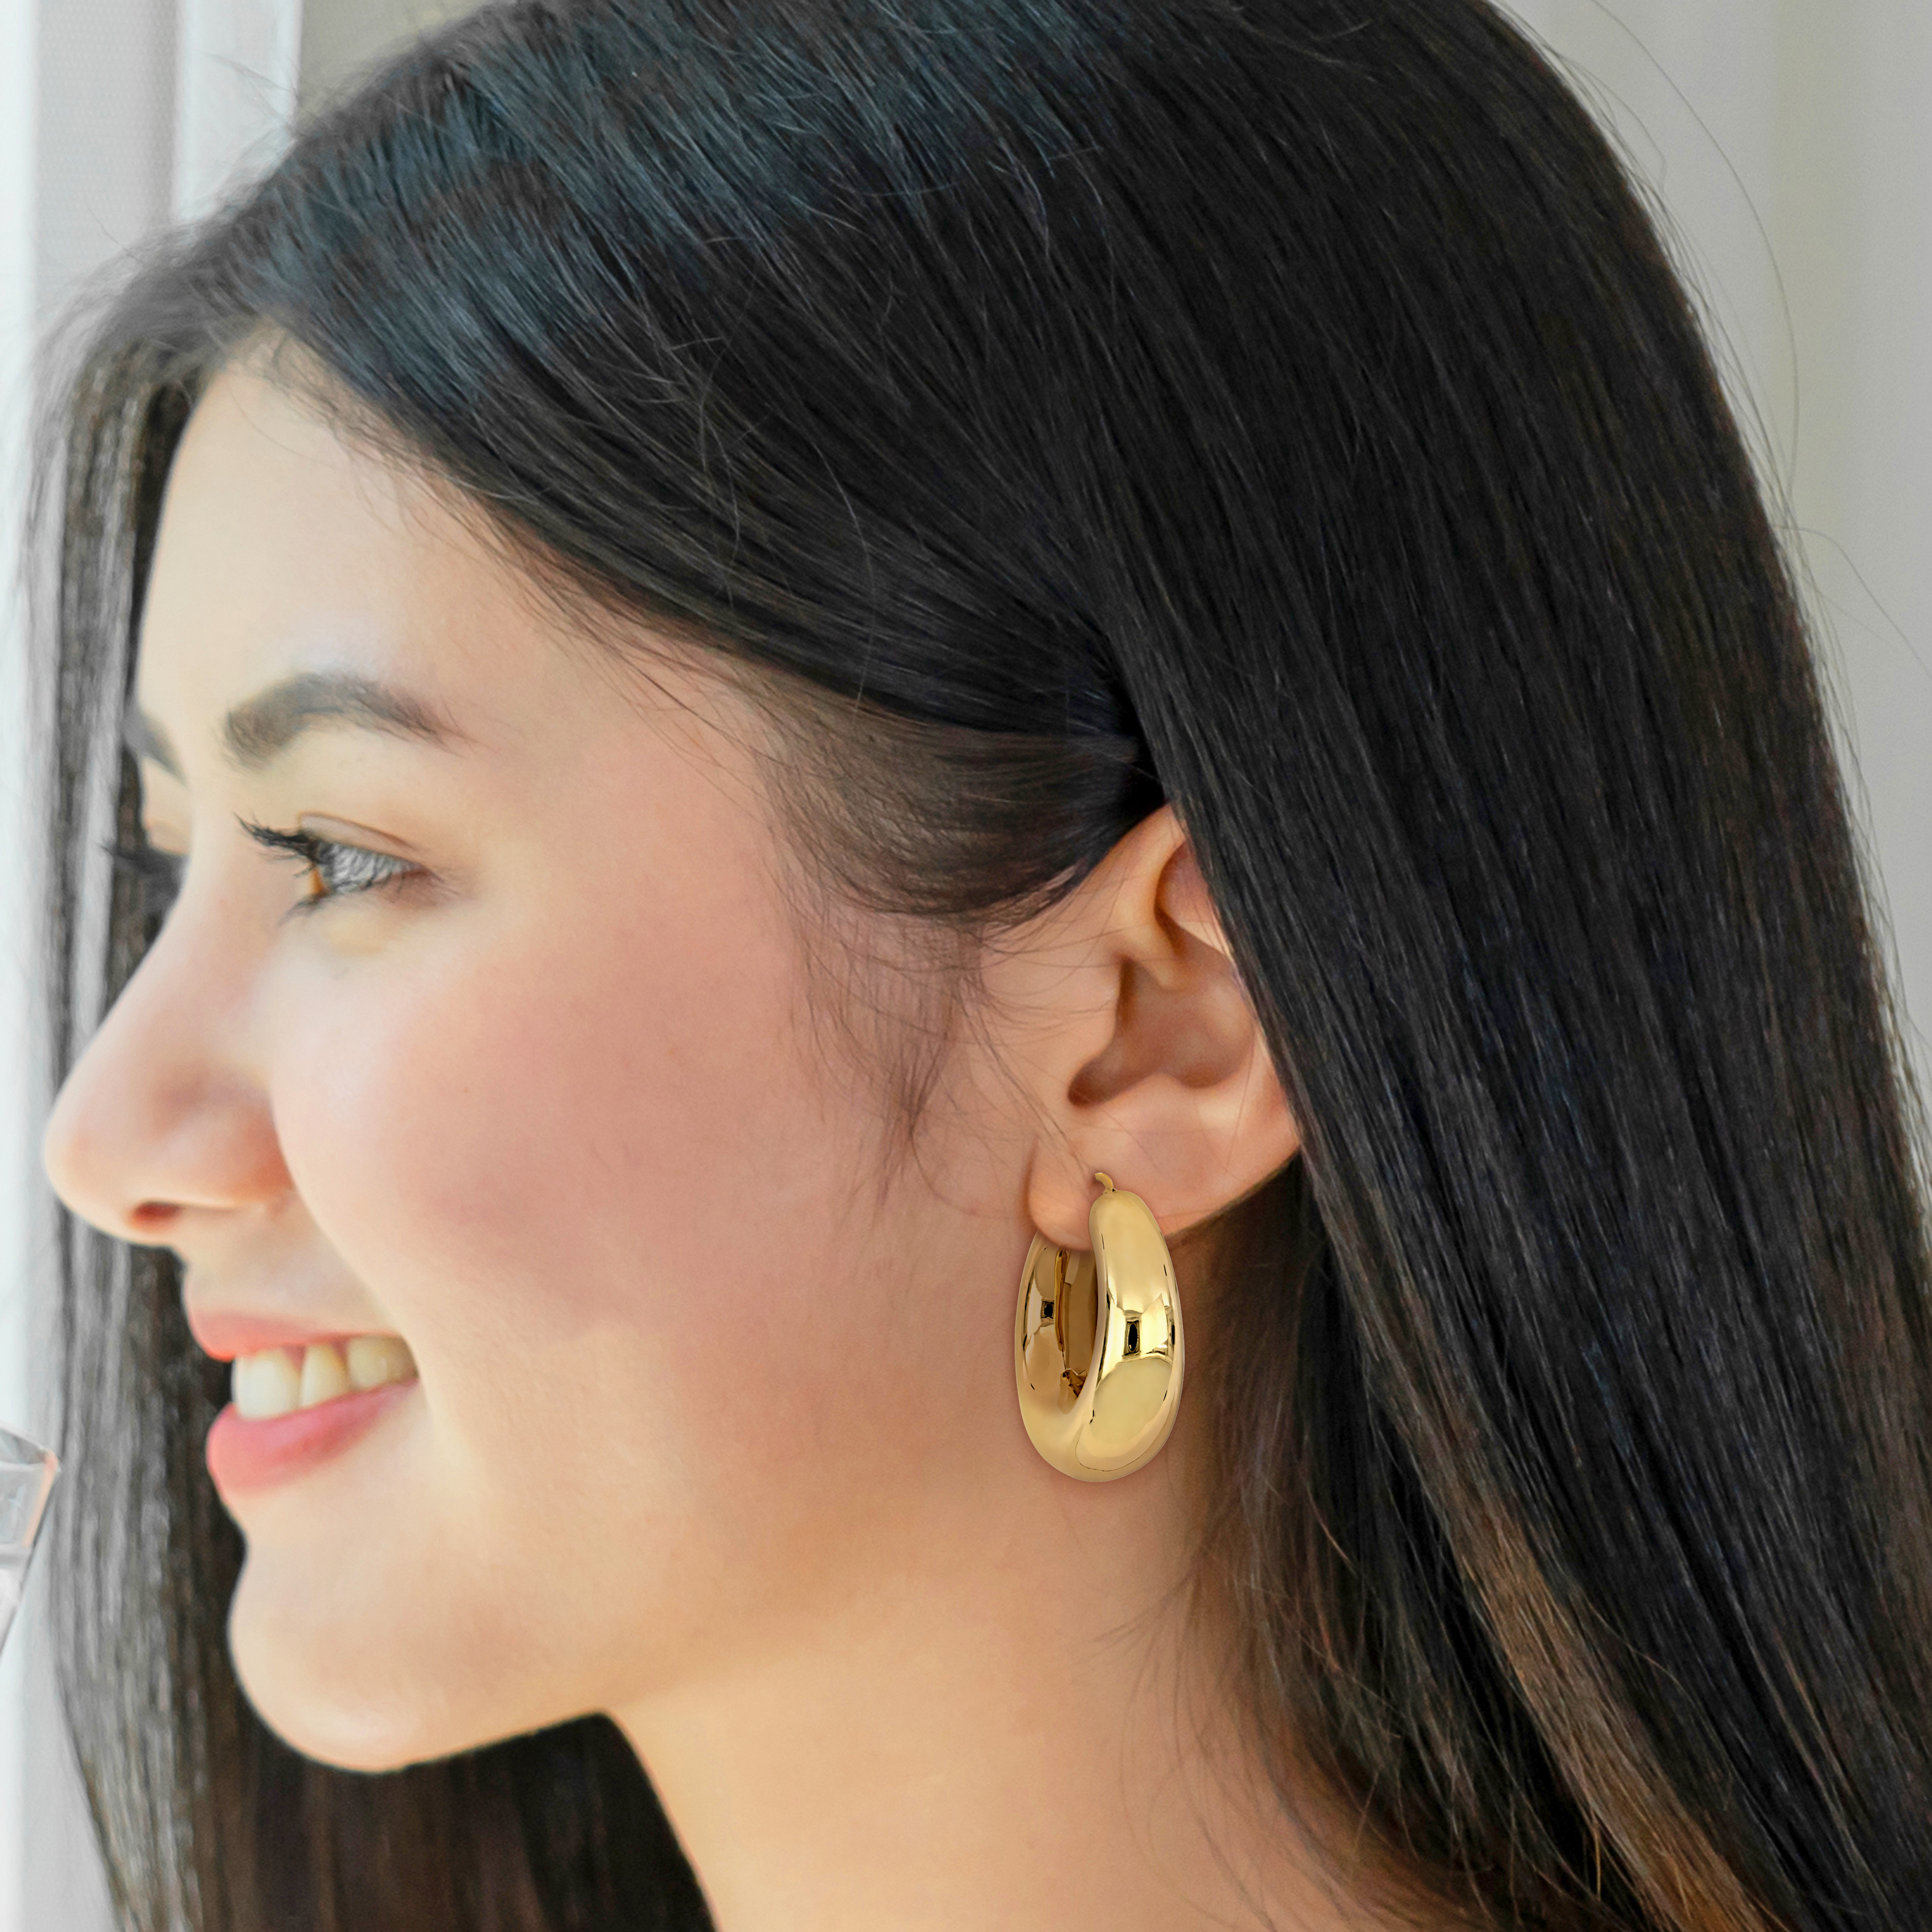 40 MM Polished Hoop Earrings in Yellow Plated Sterling Silver